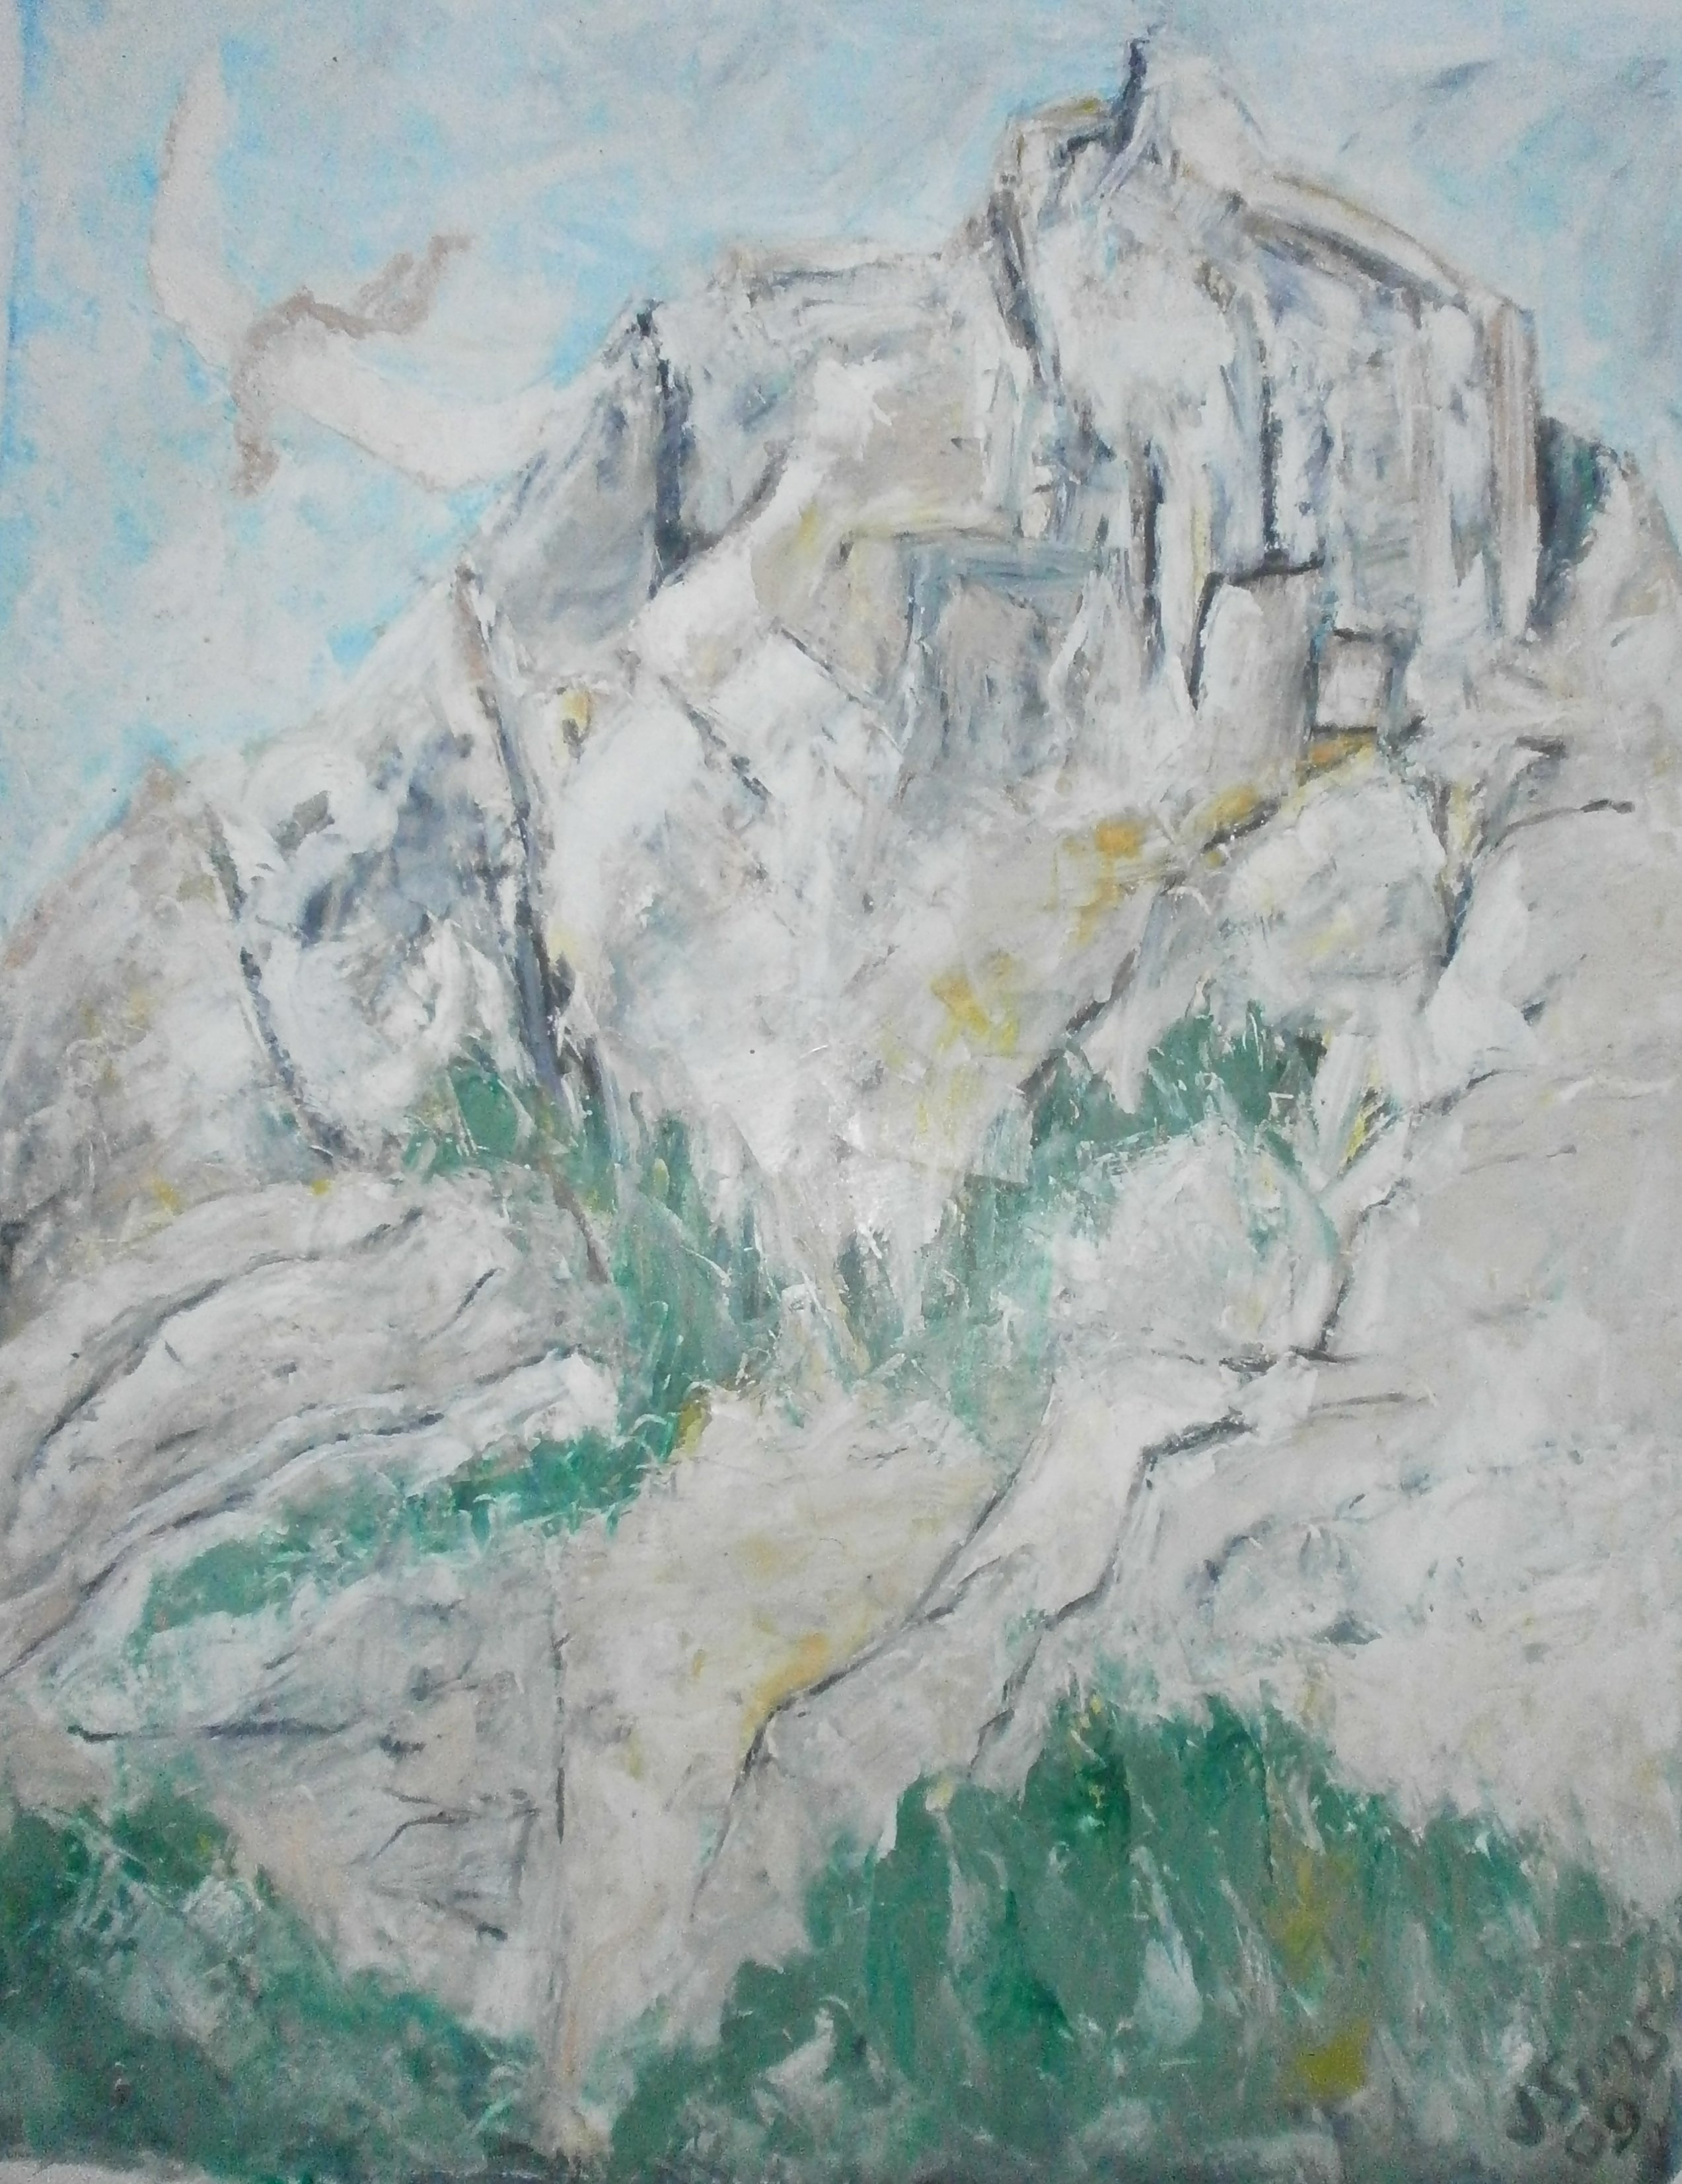 John Sims, 'Icarus In Switzerland', 2009, original Pastel Oil, 33 x 43  inches. Artwork description: 2103 In summer 2009 I was invited to represent Cyprus at a stone carving symposium in the mountain village of Vattis in Switzerland. When not carving I made drawings of the beautiful landscape all around me. The village is situated in a deep river valley with high mountains ...